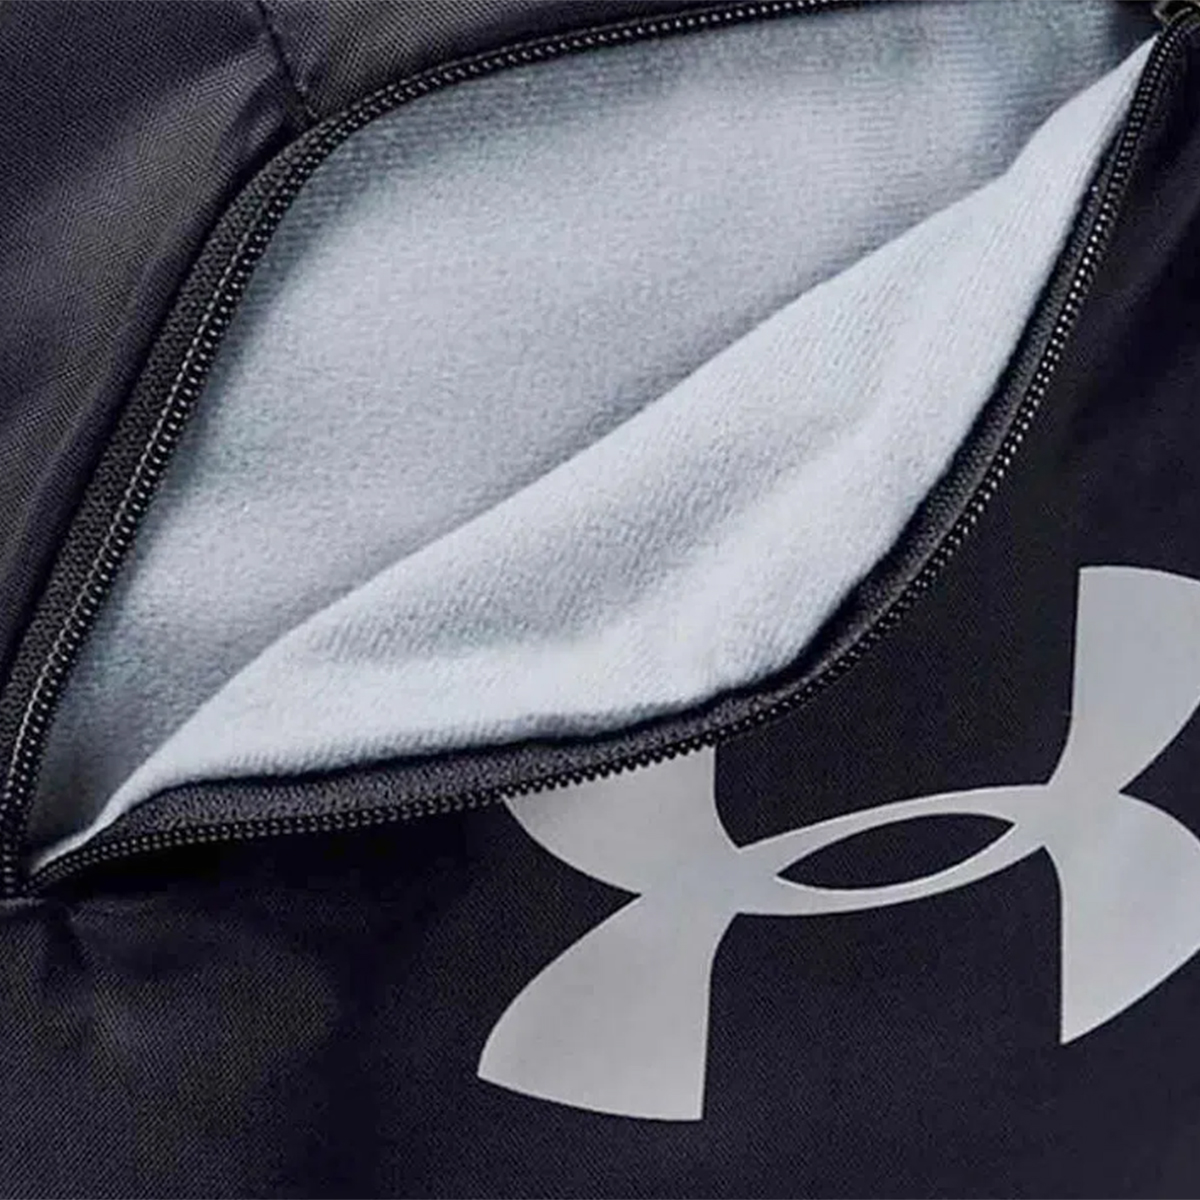 Mochila Under Armour Undeniable 2.0,  image number null